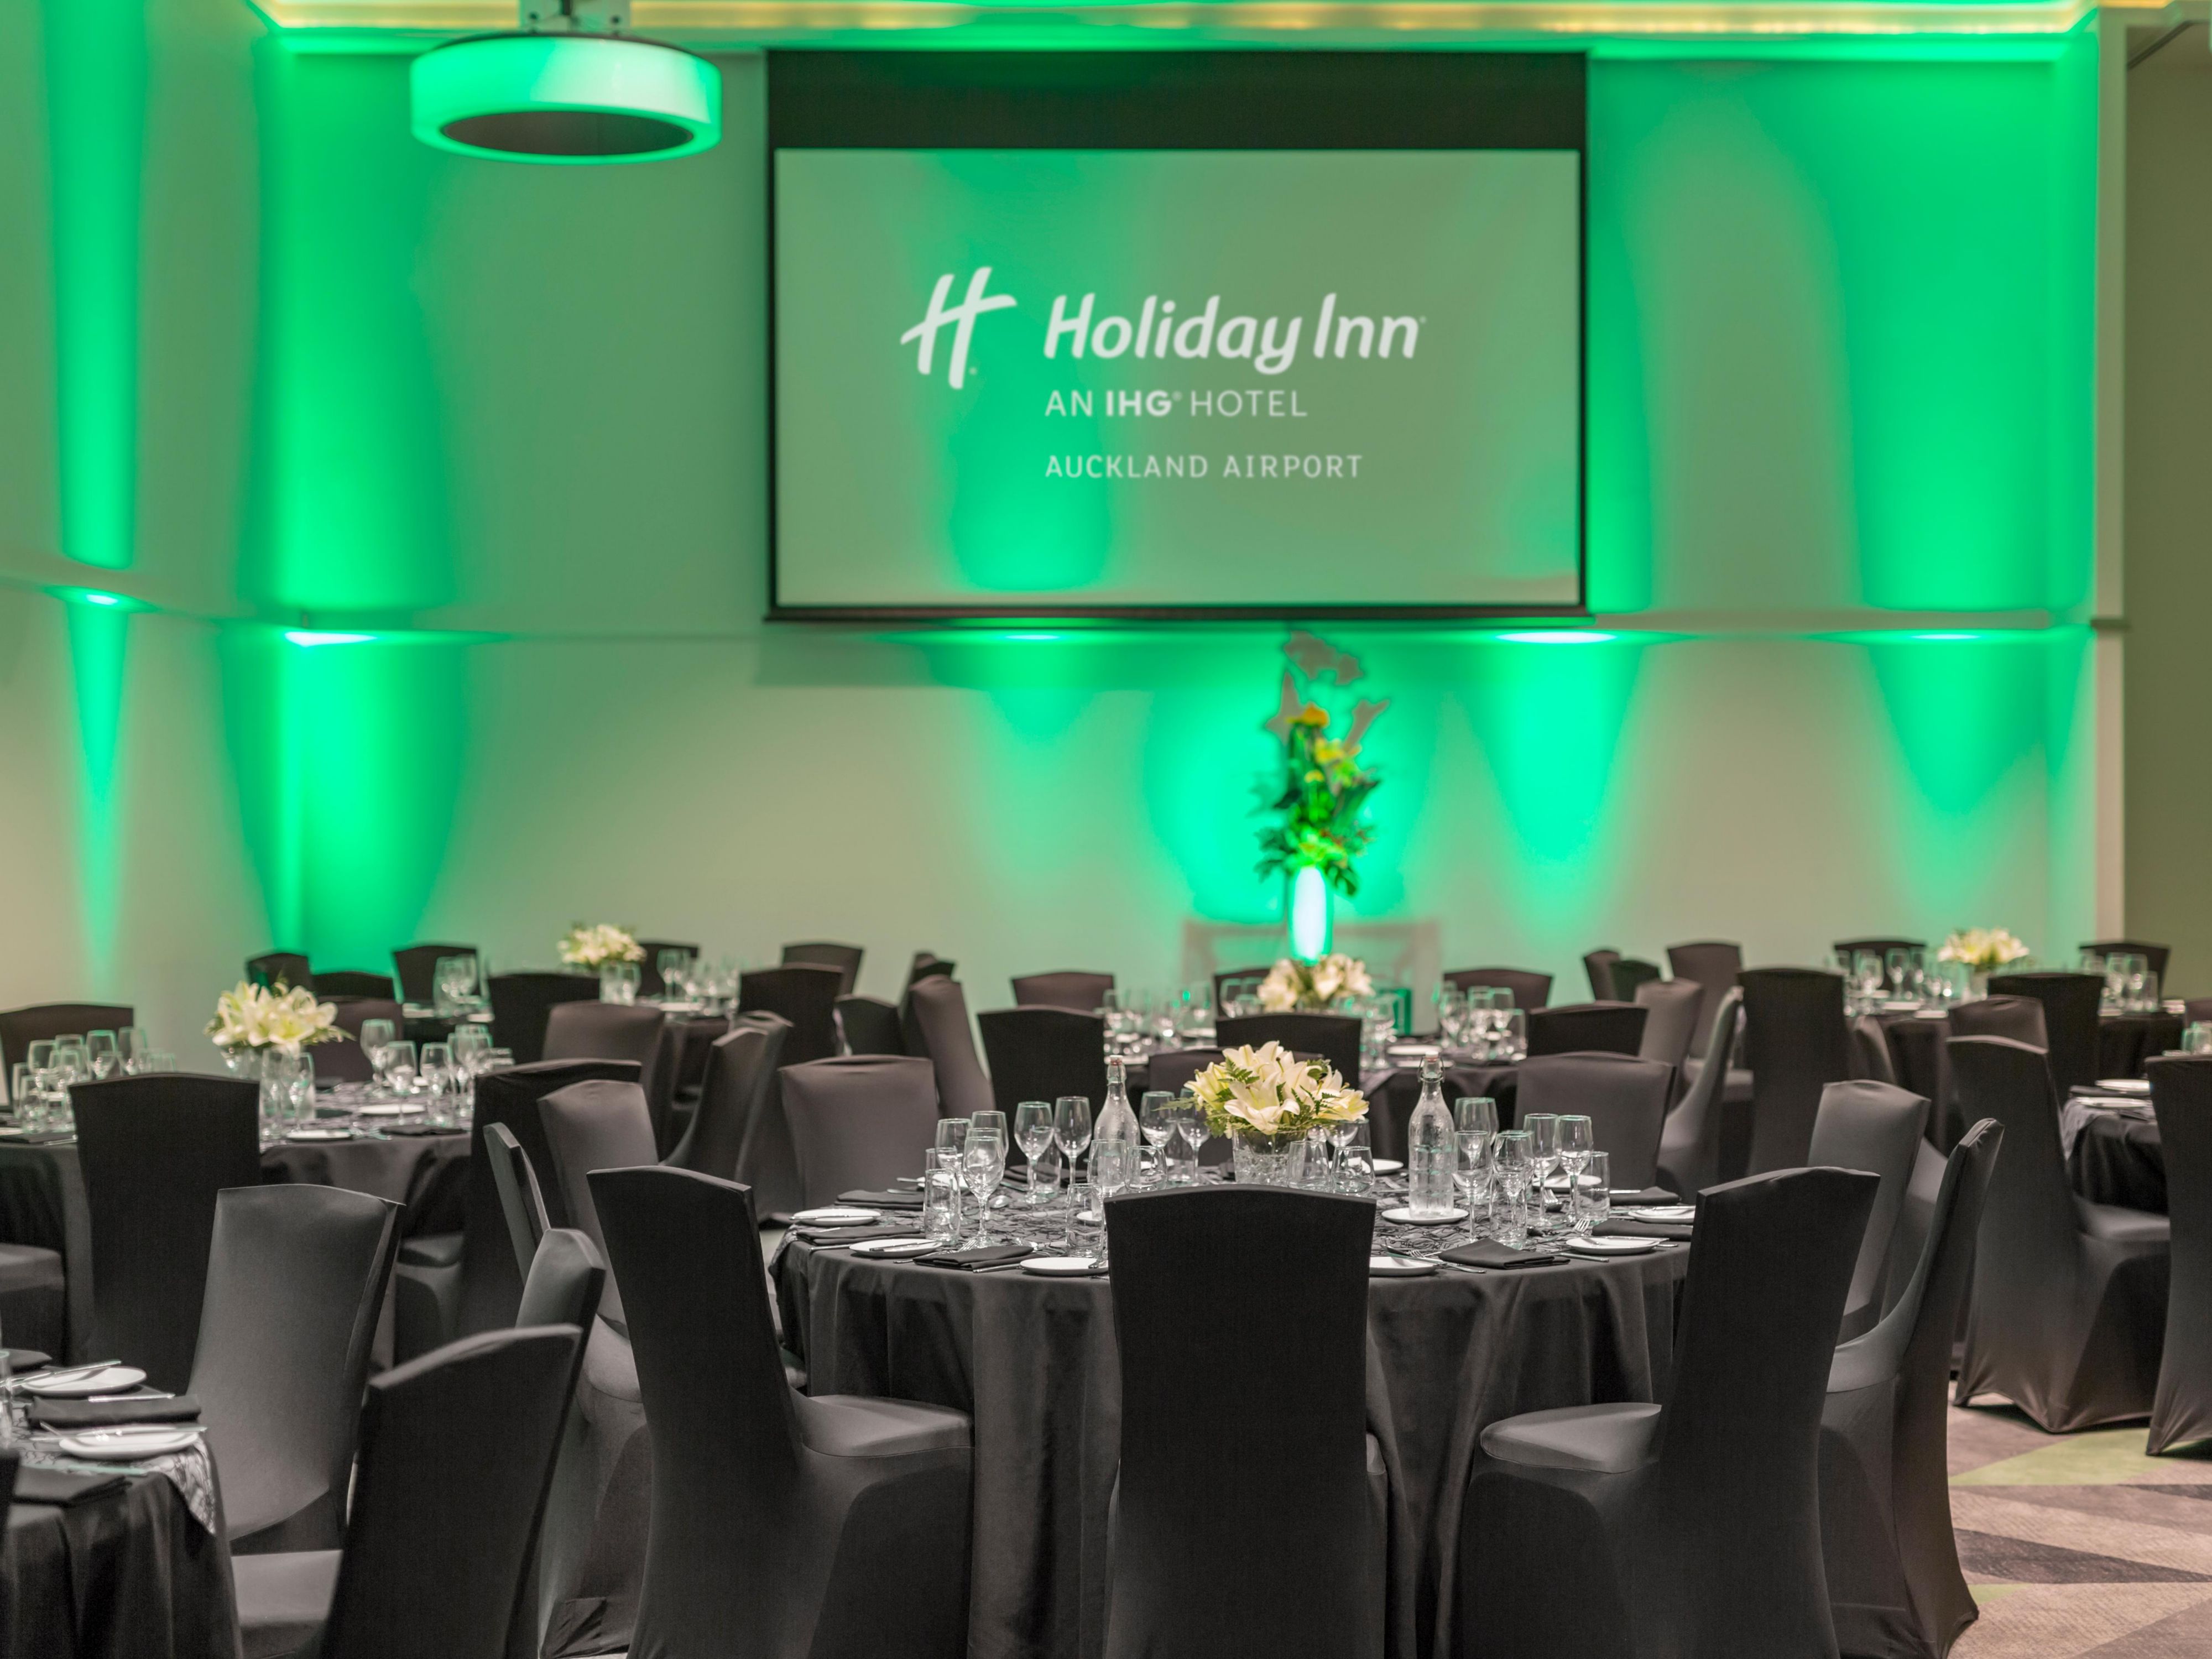 Make every event memorable with IHG